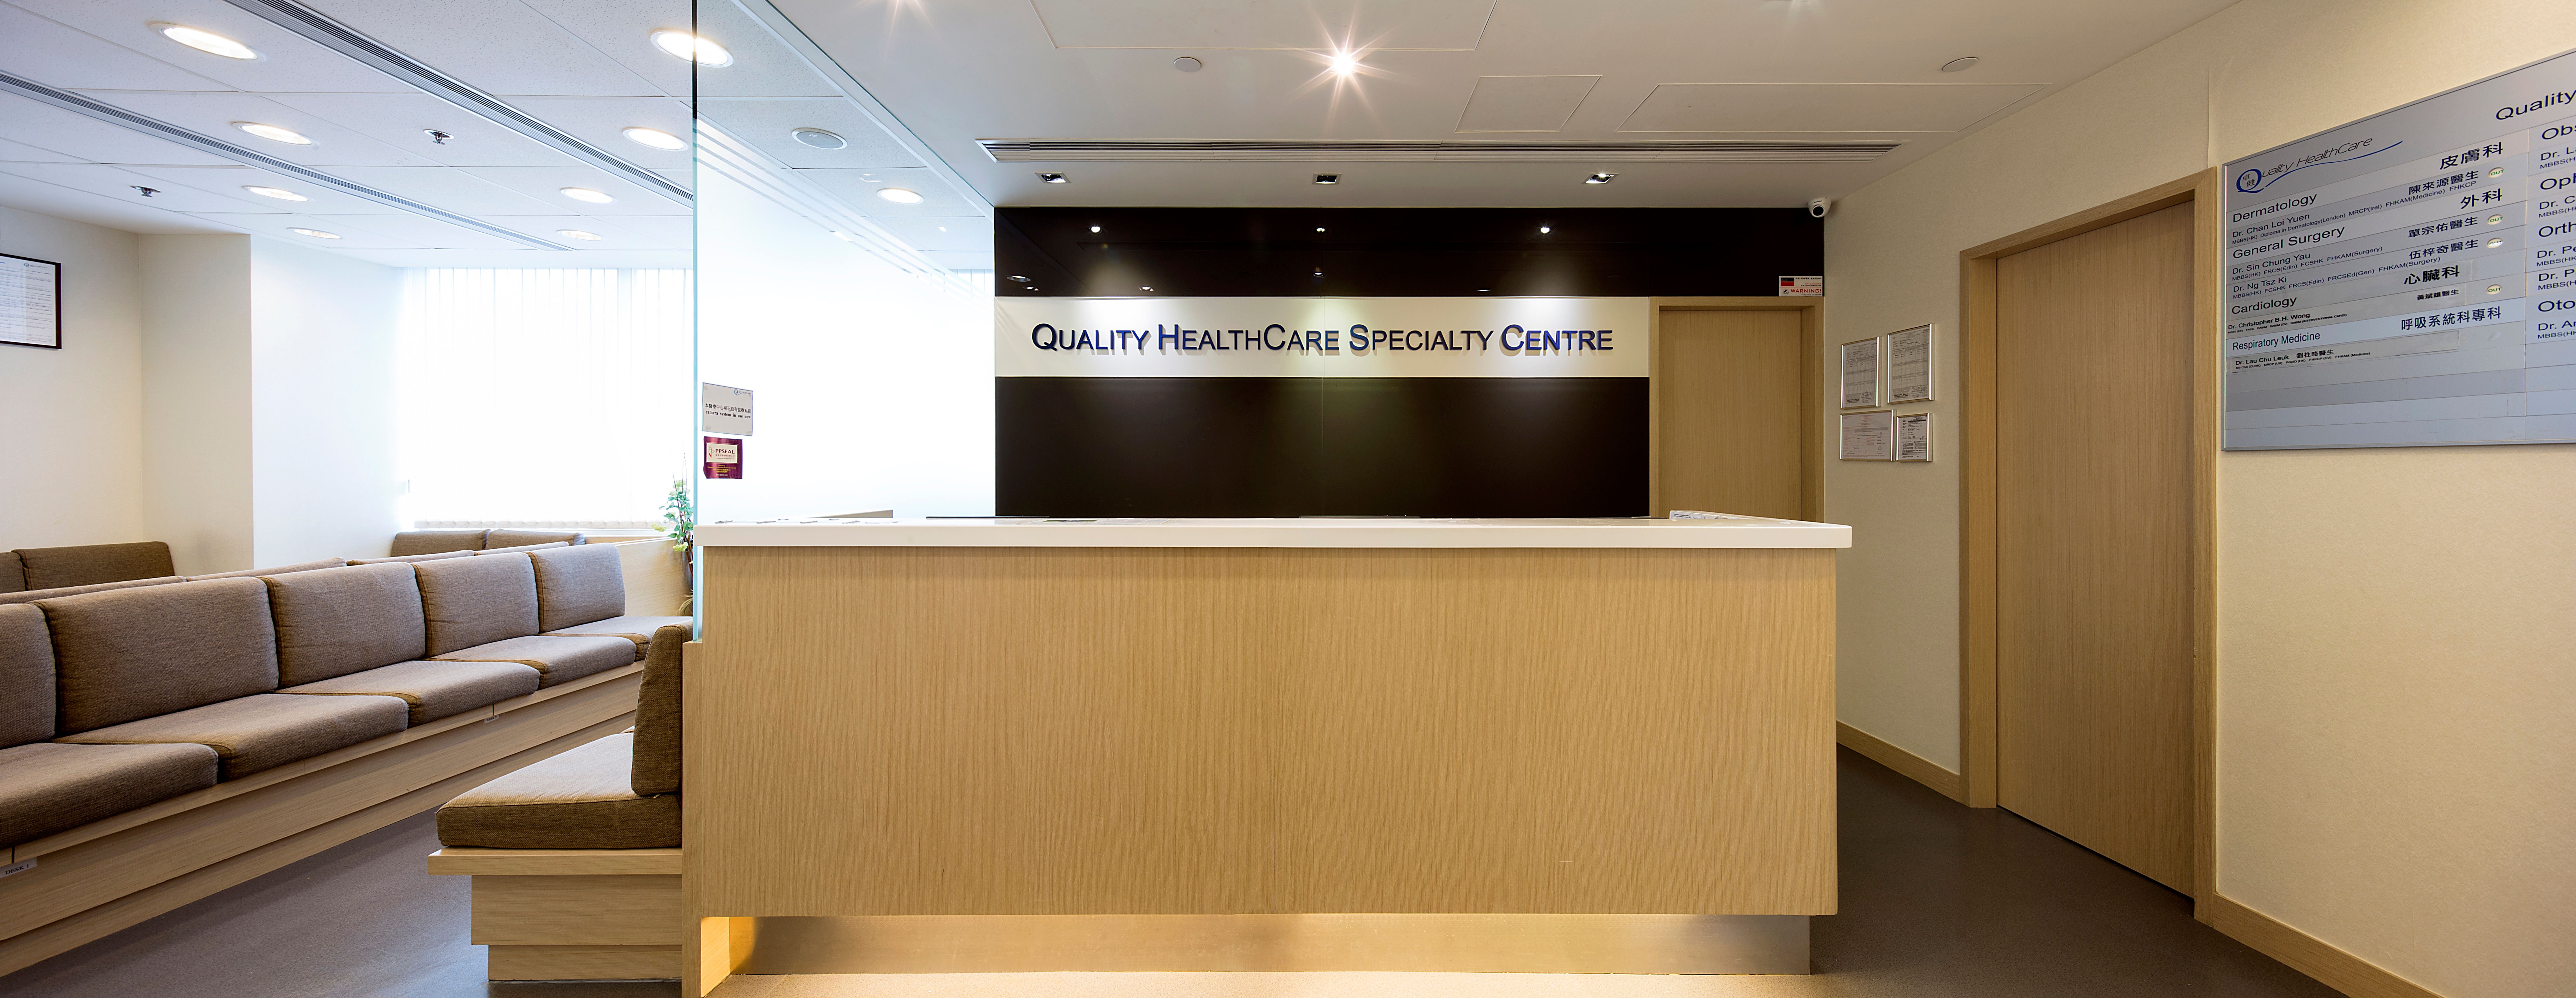 Quality HealthCare Specialty Centre reception and waiting area